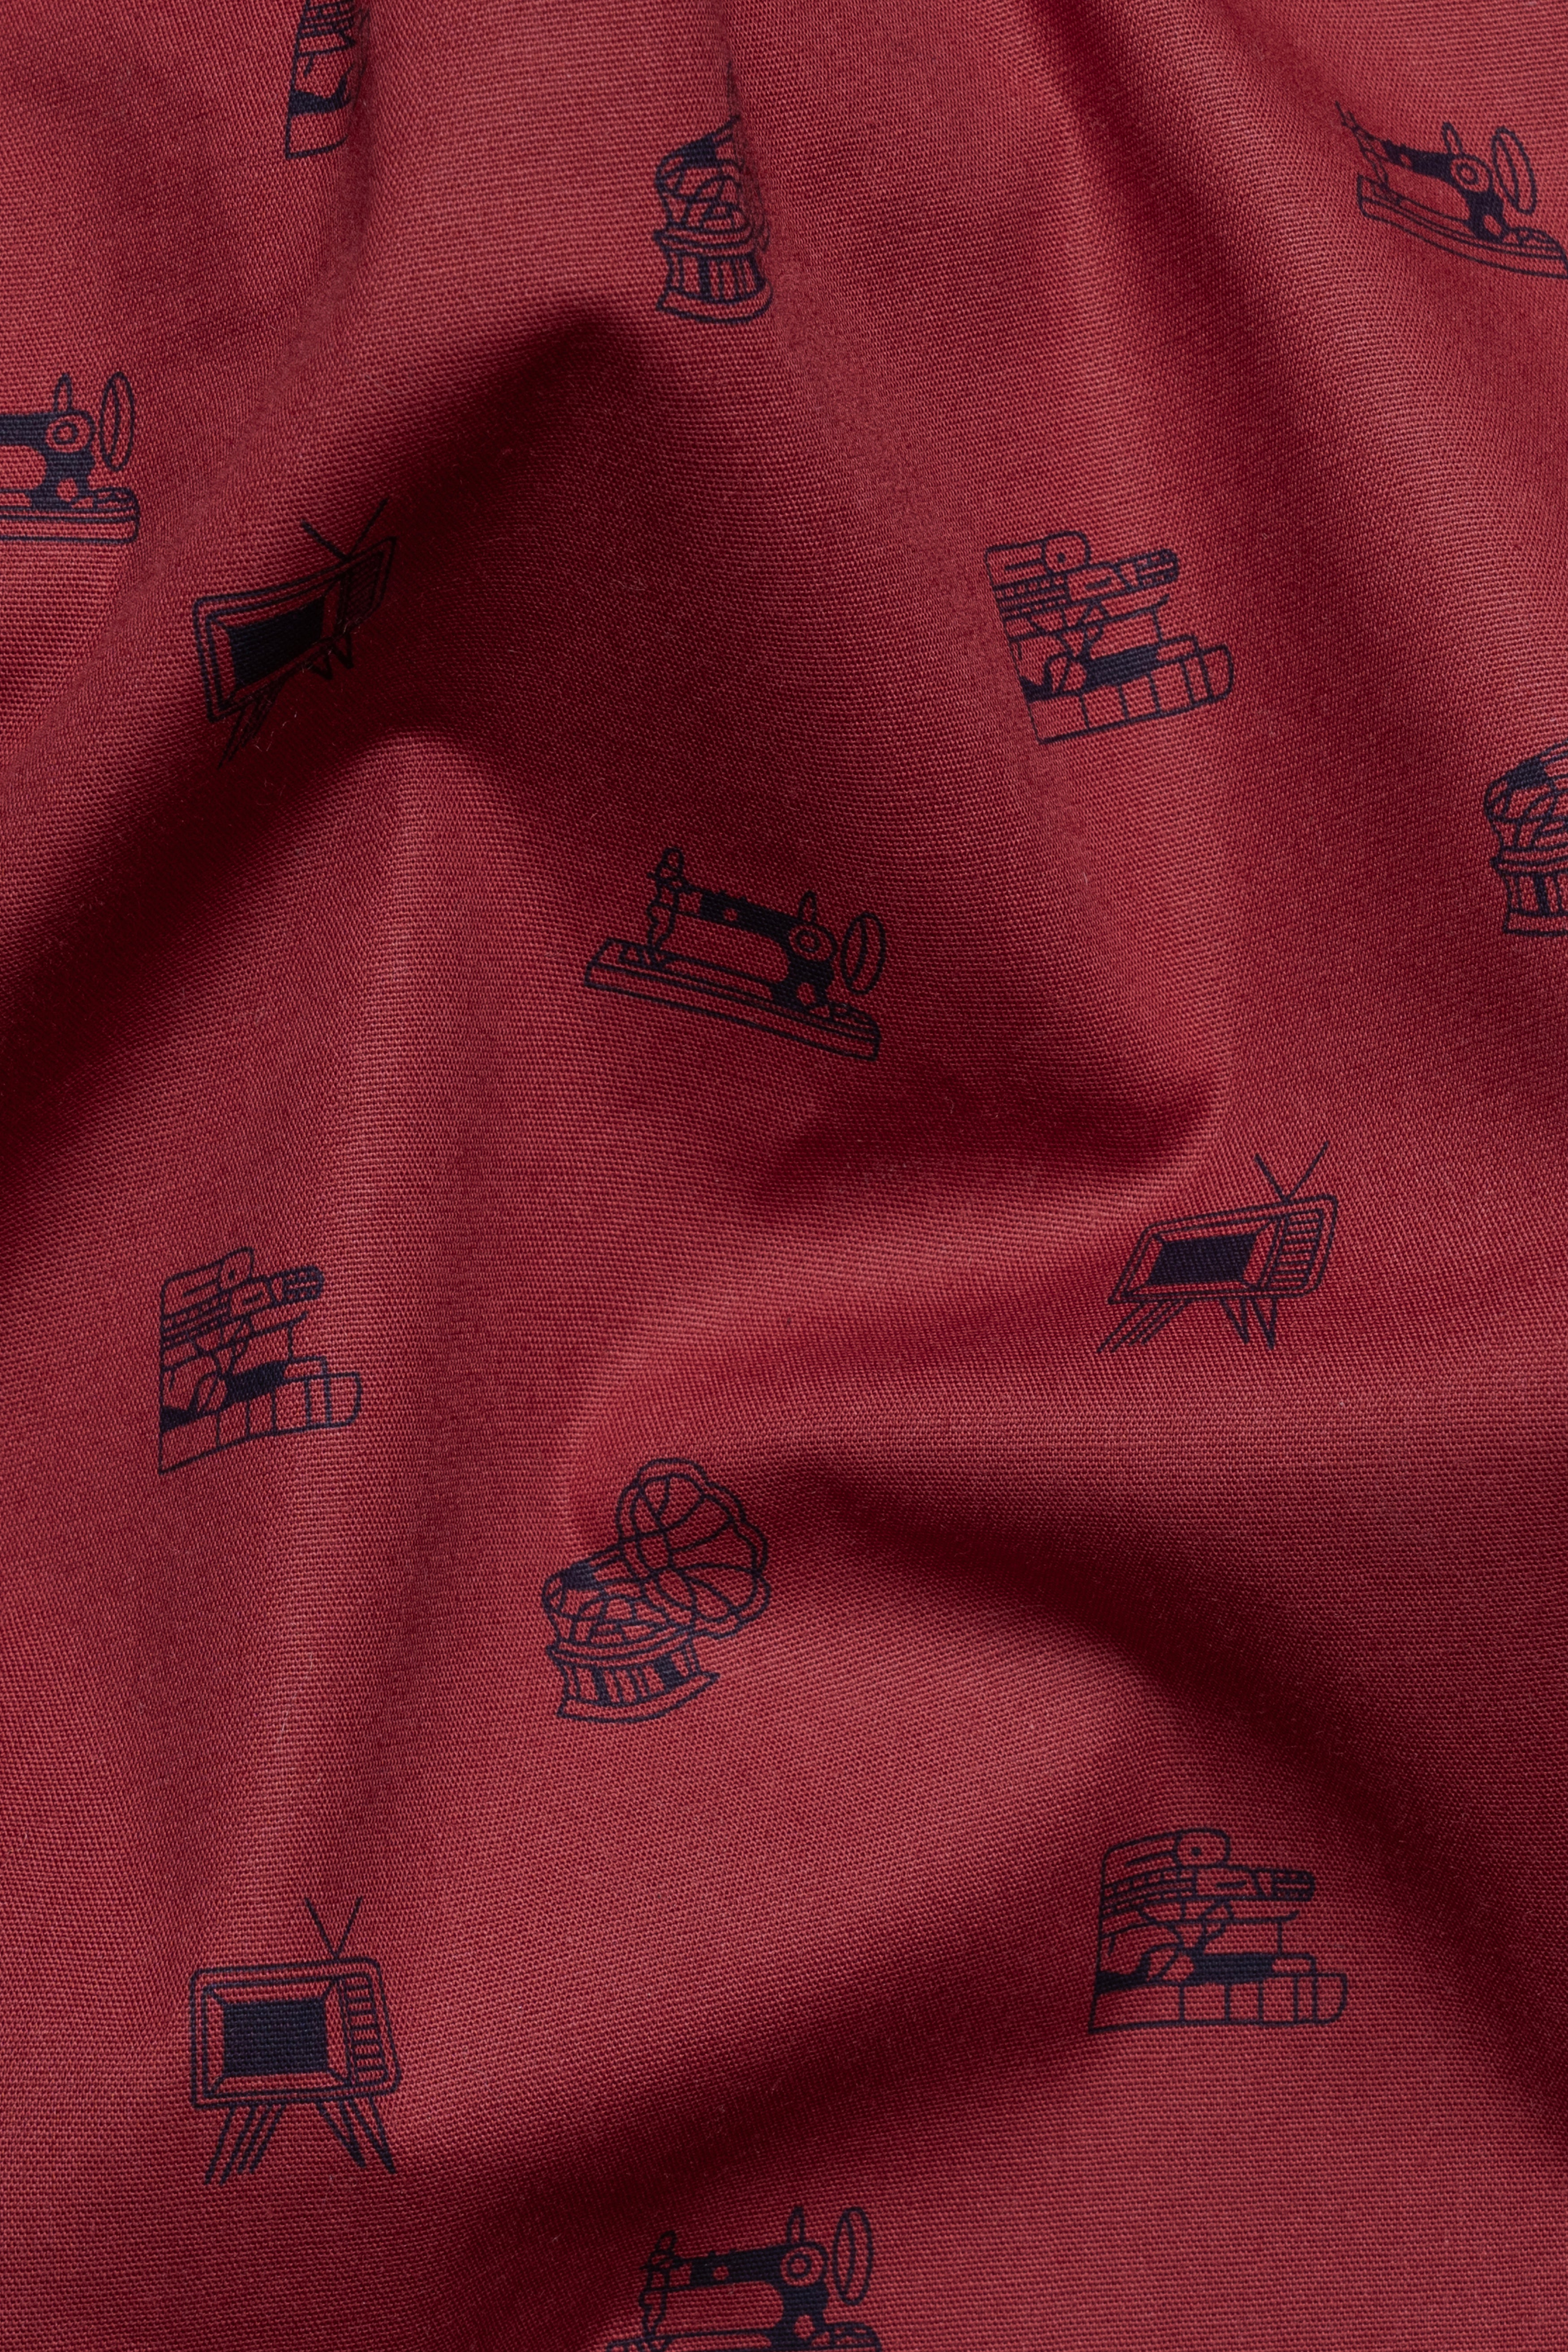 Tawny Port Brown Sewing Machine and Television Printed Super Soft Premium Cotton Shirt